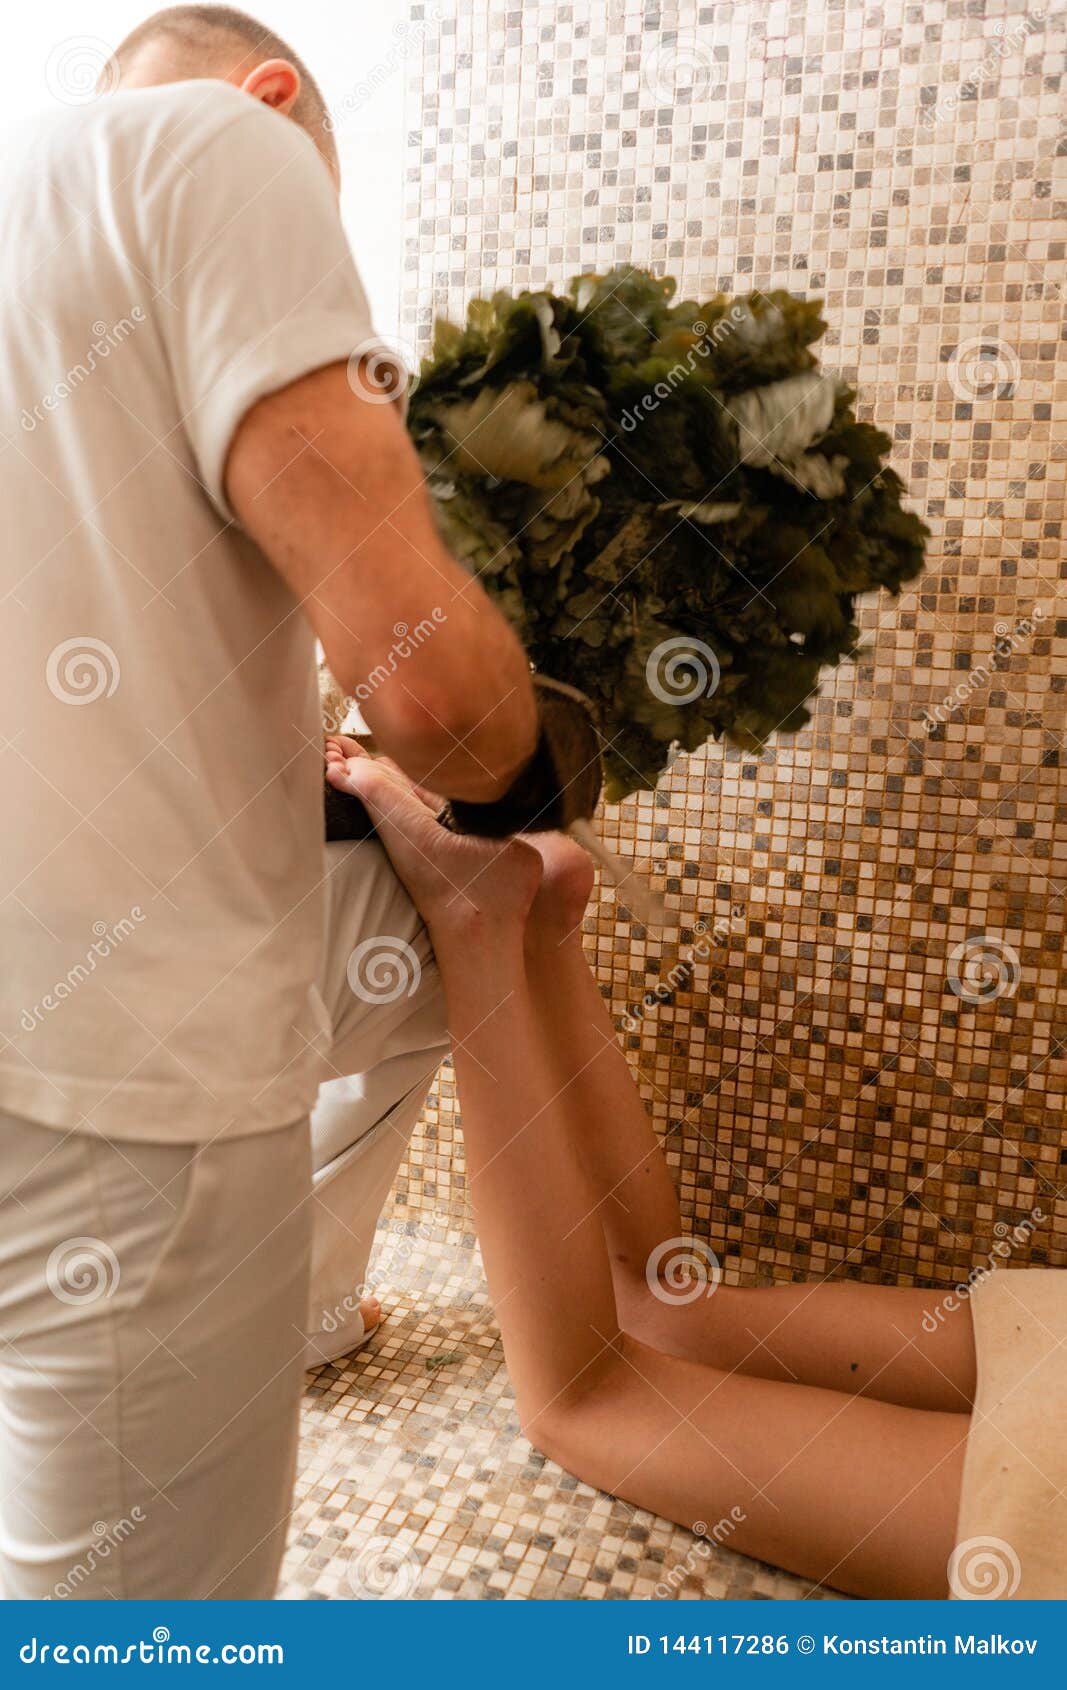 Slim Woman In Bath Is Getting Steaming Massage With Hot Oak Leaves Brooms In Steam Room Stock